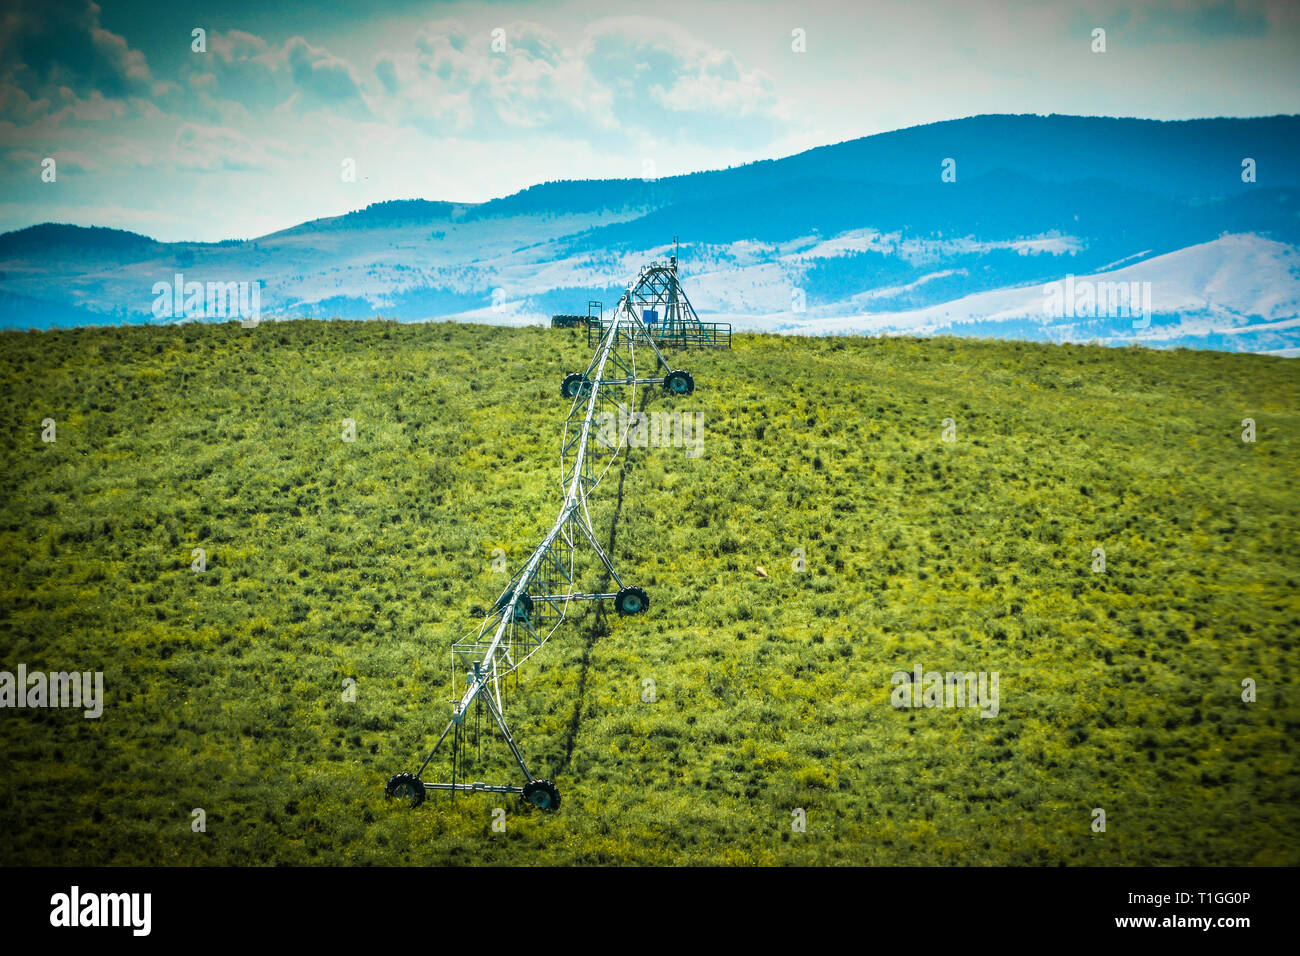 A low-pressure center-pivot irrigation system on a hill in a green field with Mountains in background in Montana Stock Photo